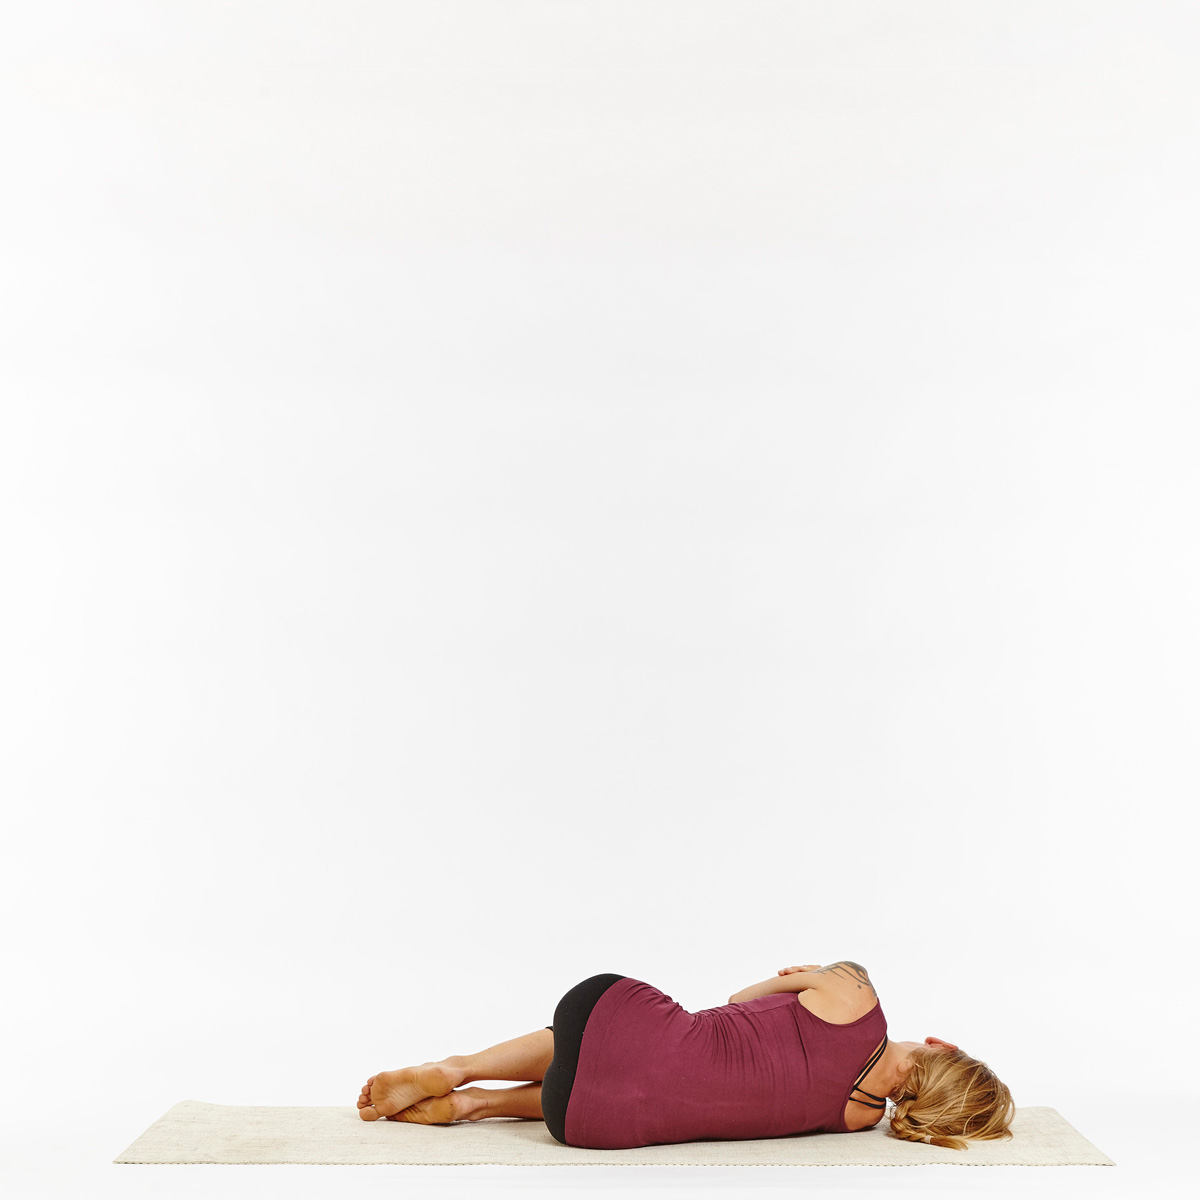 Unable to sleep? Try these 7 YOGA poses for better SLEEP